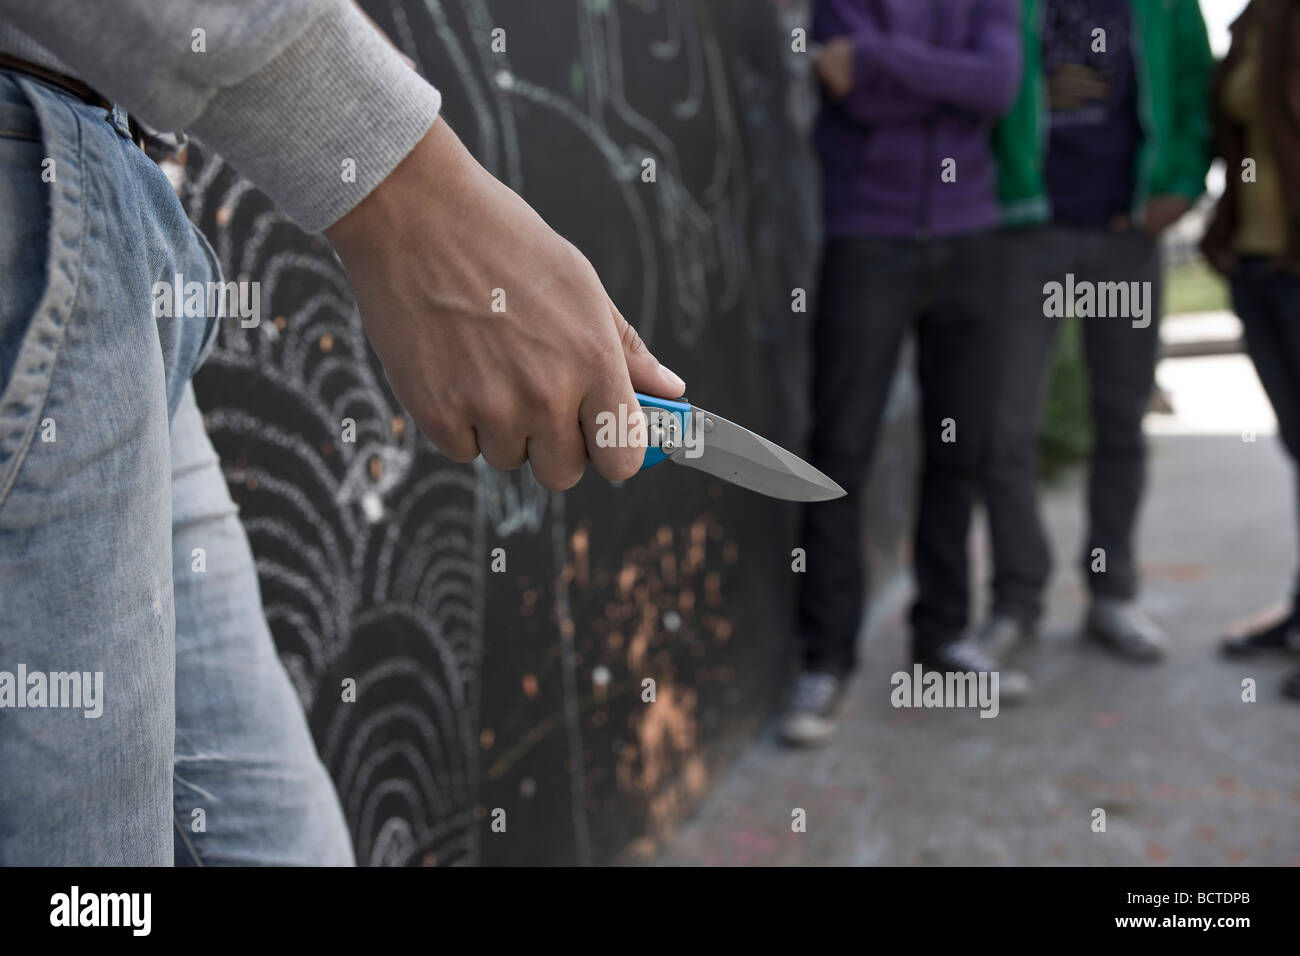 Adolescent threatening a group with a knife Stock Photo